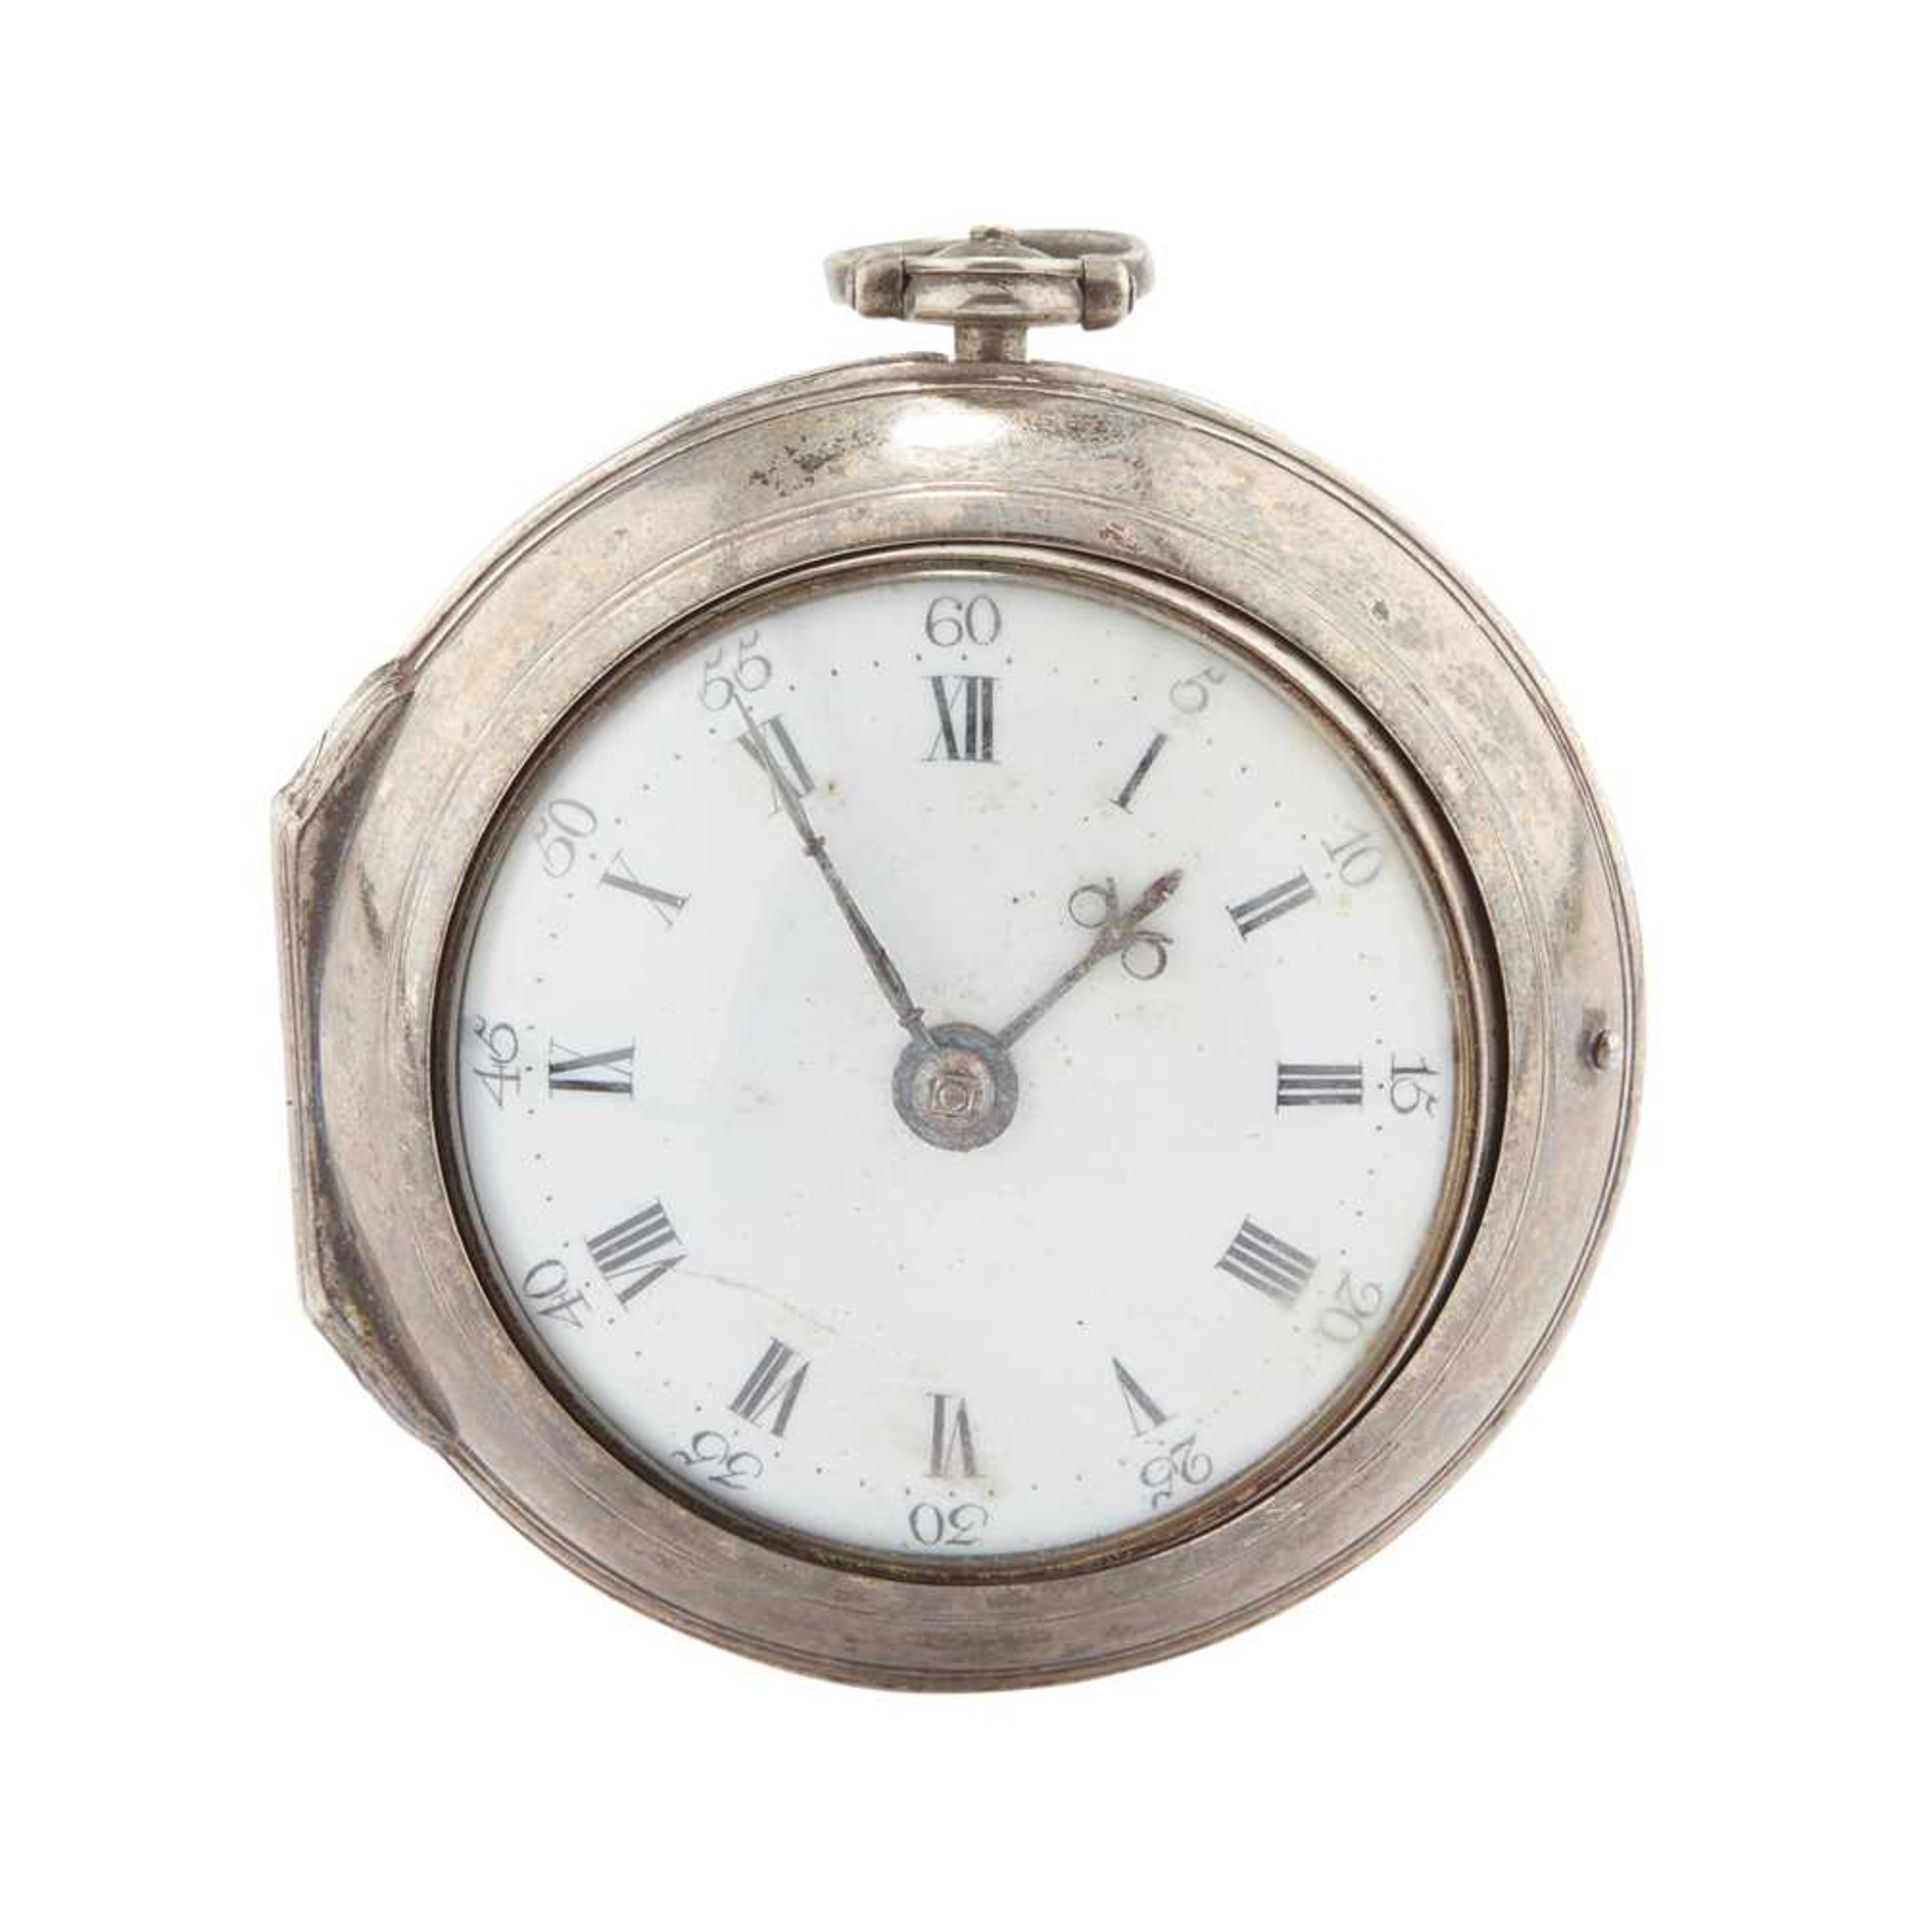 A LATE 18TH CENTURY SILVER PAIR CASED VERGE POCKET WATCH J. LYNDER, LONDON CIRCA 1781